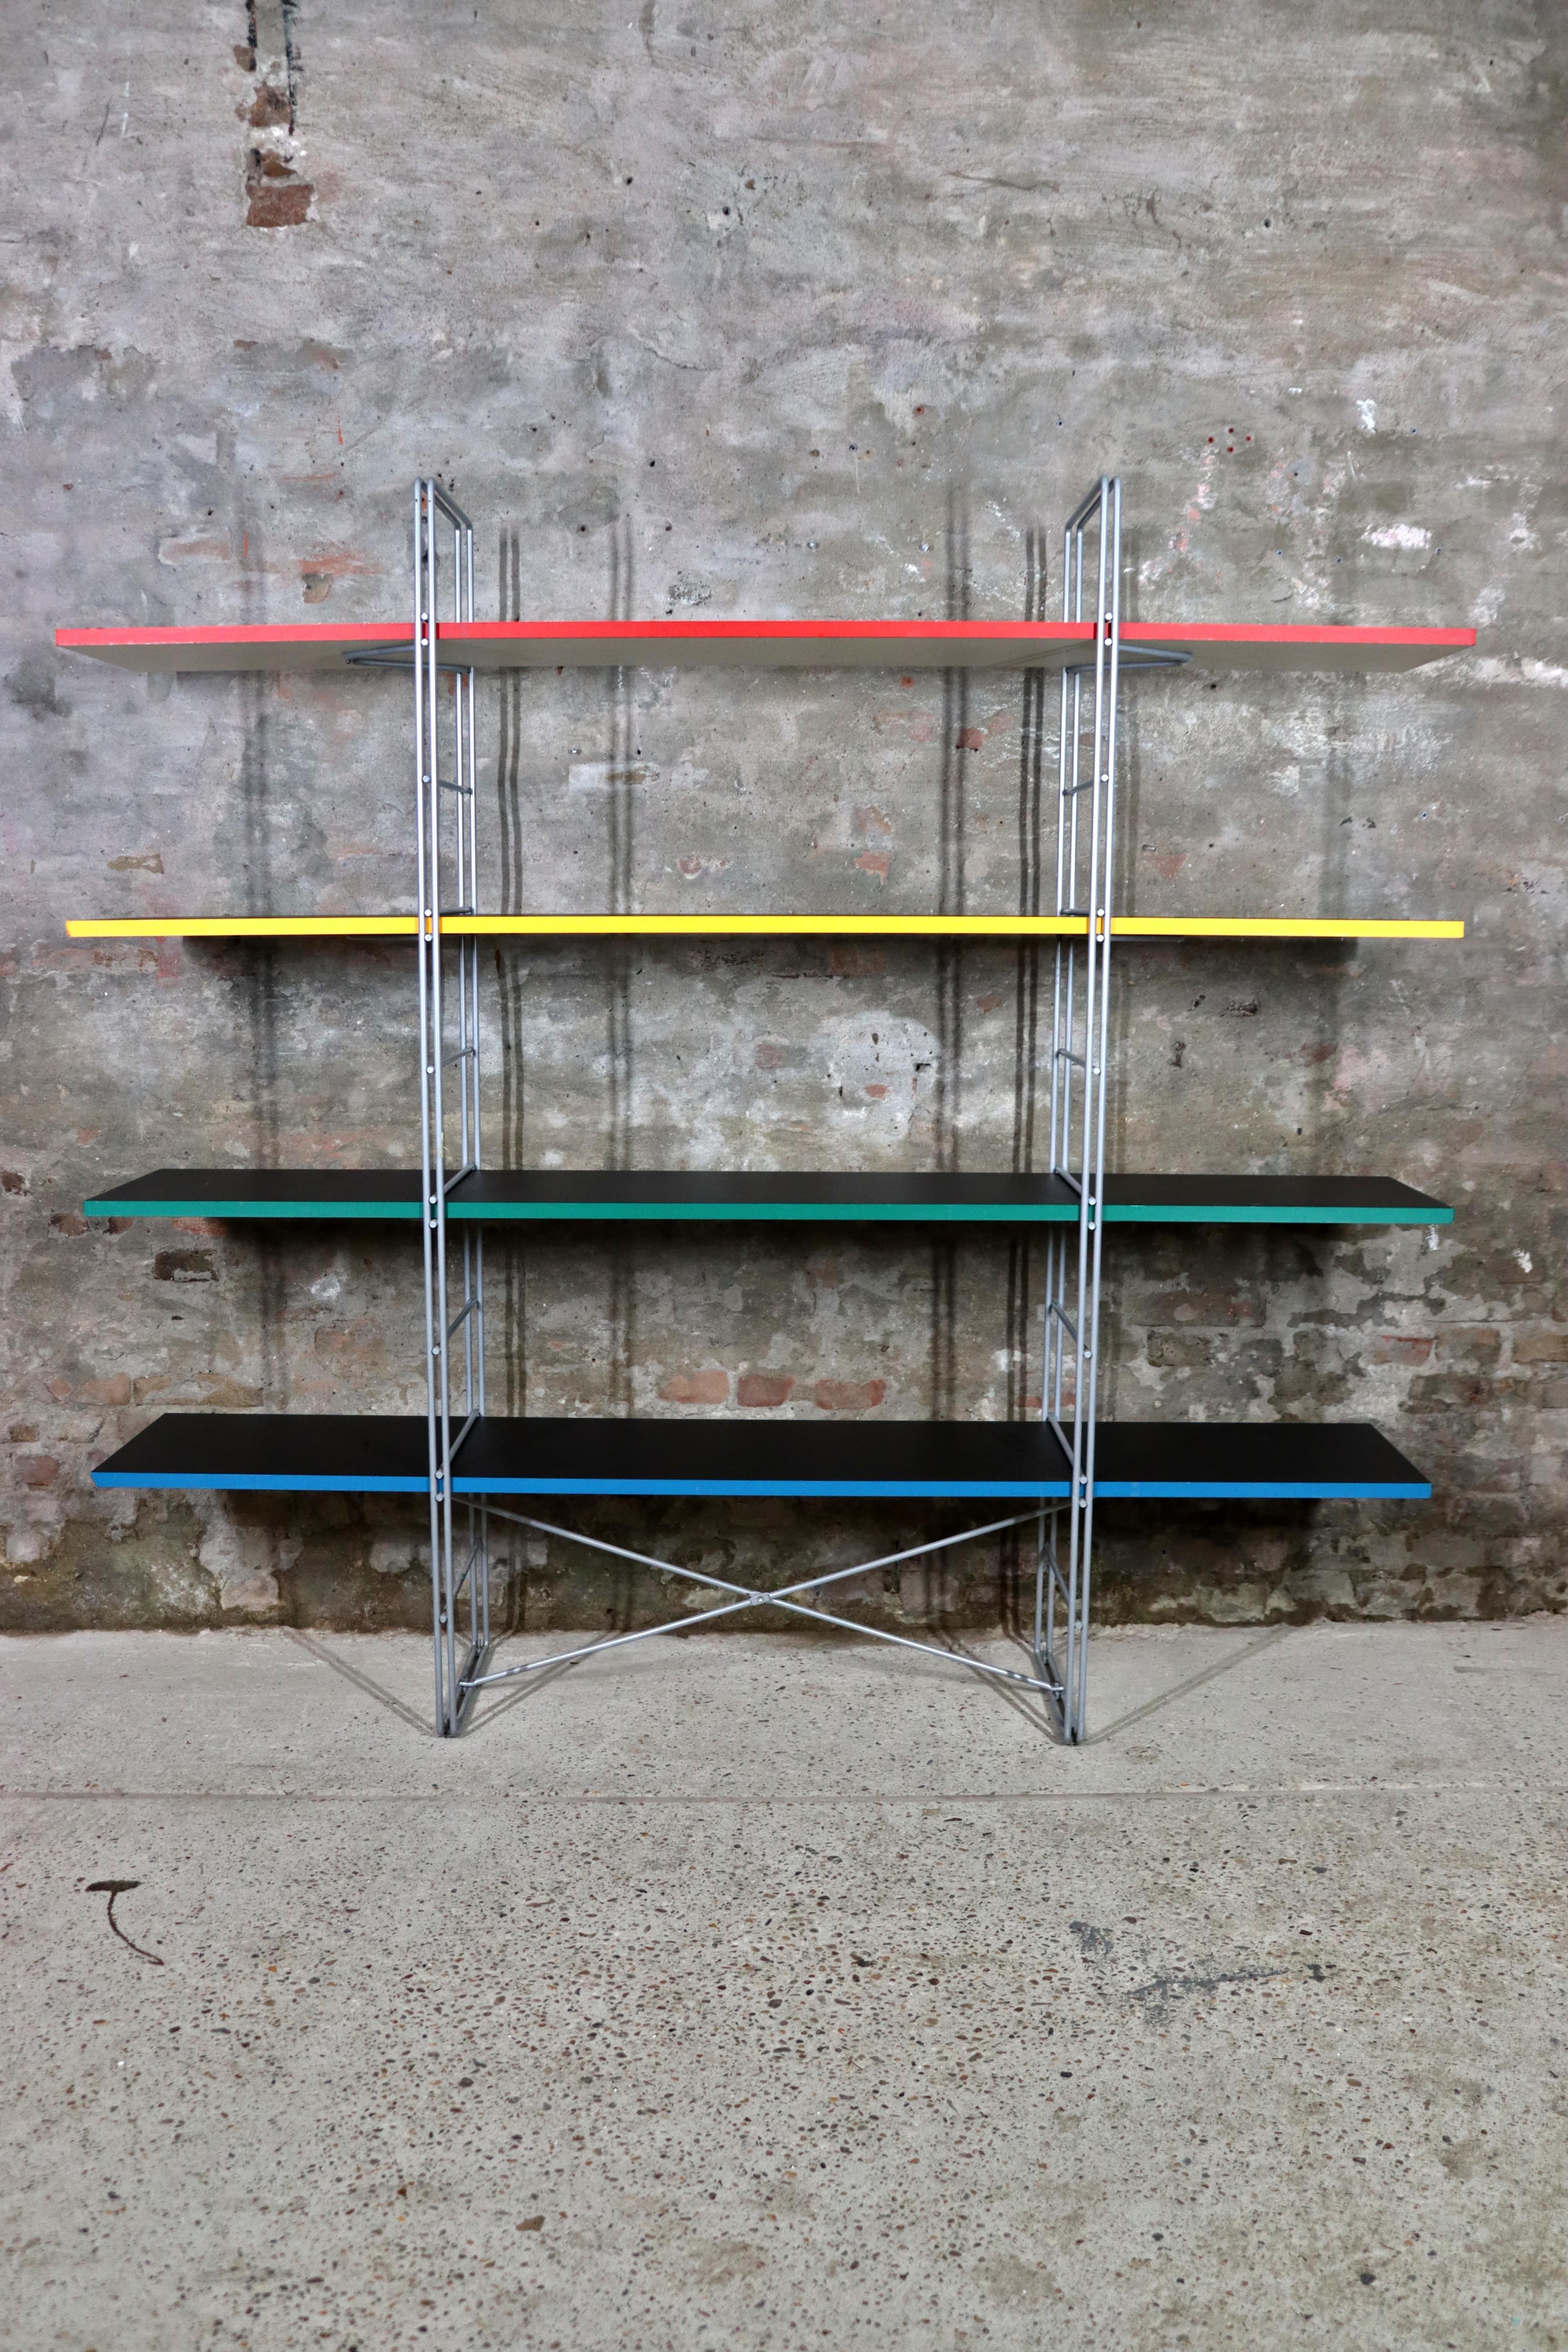 Shelving System Guide by Niels Gammelgaard for Ikea in 1985. The metal structure is in grey lacquered steel and supports the shelves. The shelves are colored on one side and white on the other. Good condition, but there are signs of usage and wear